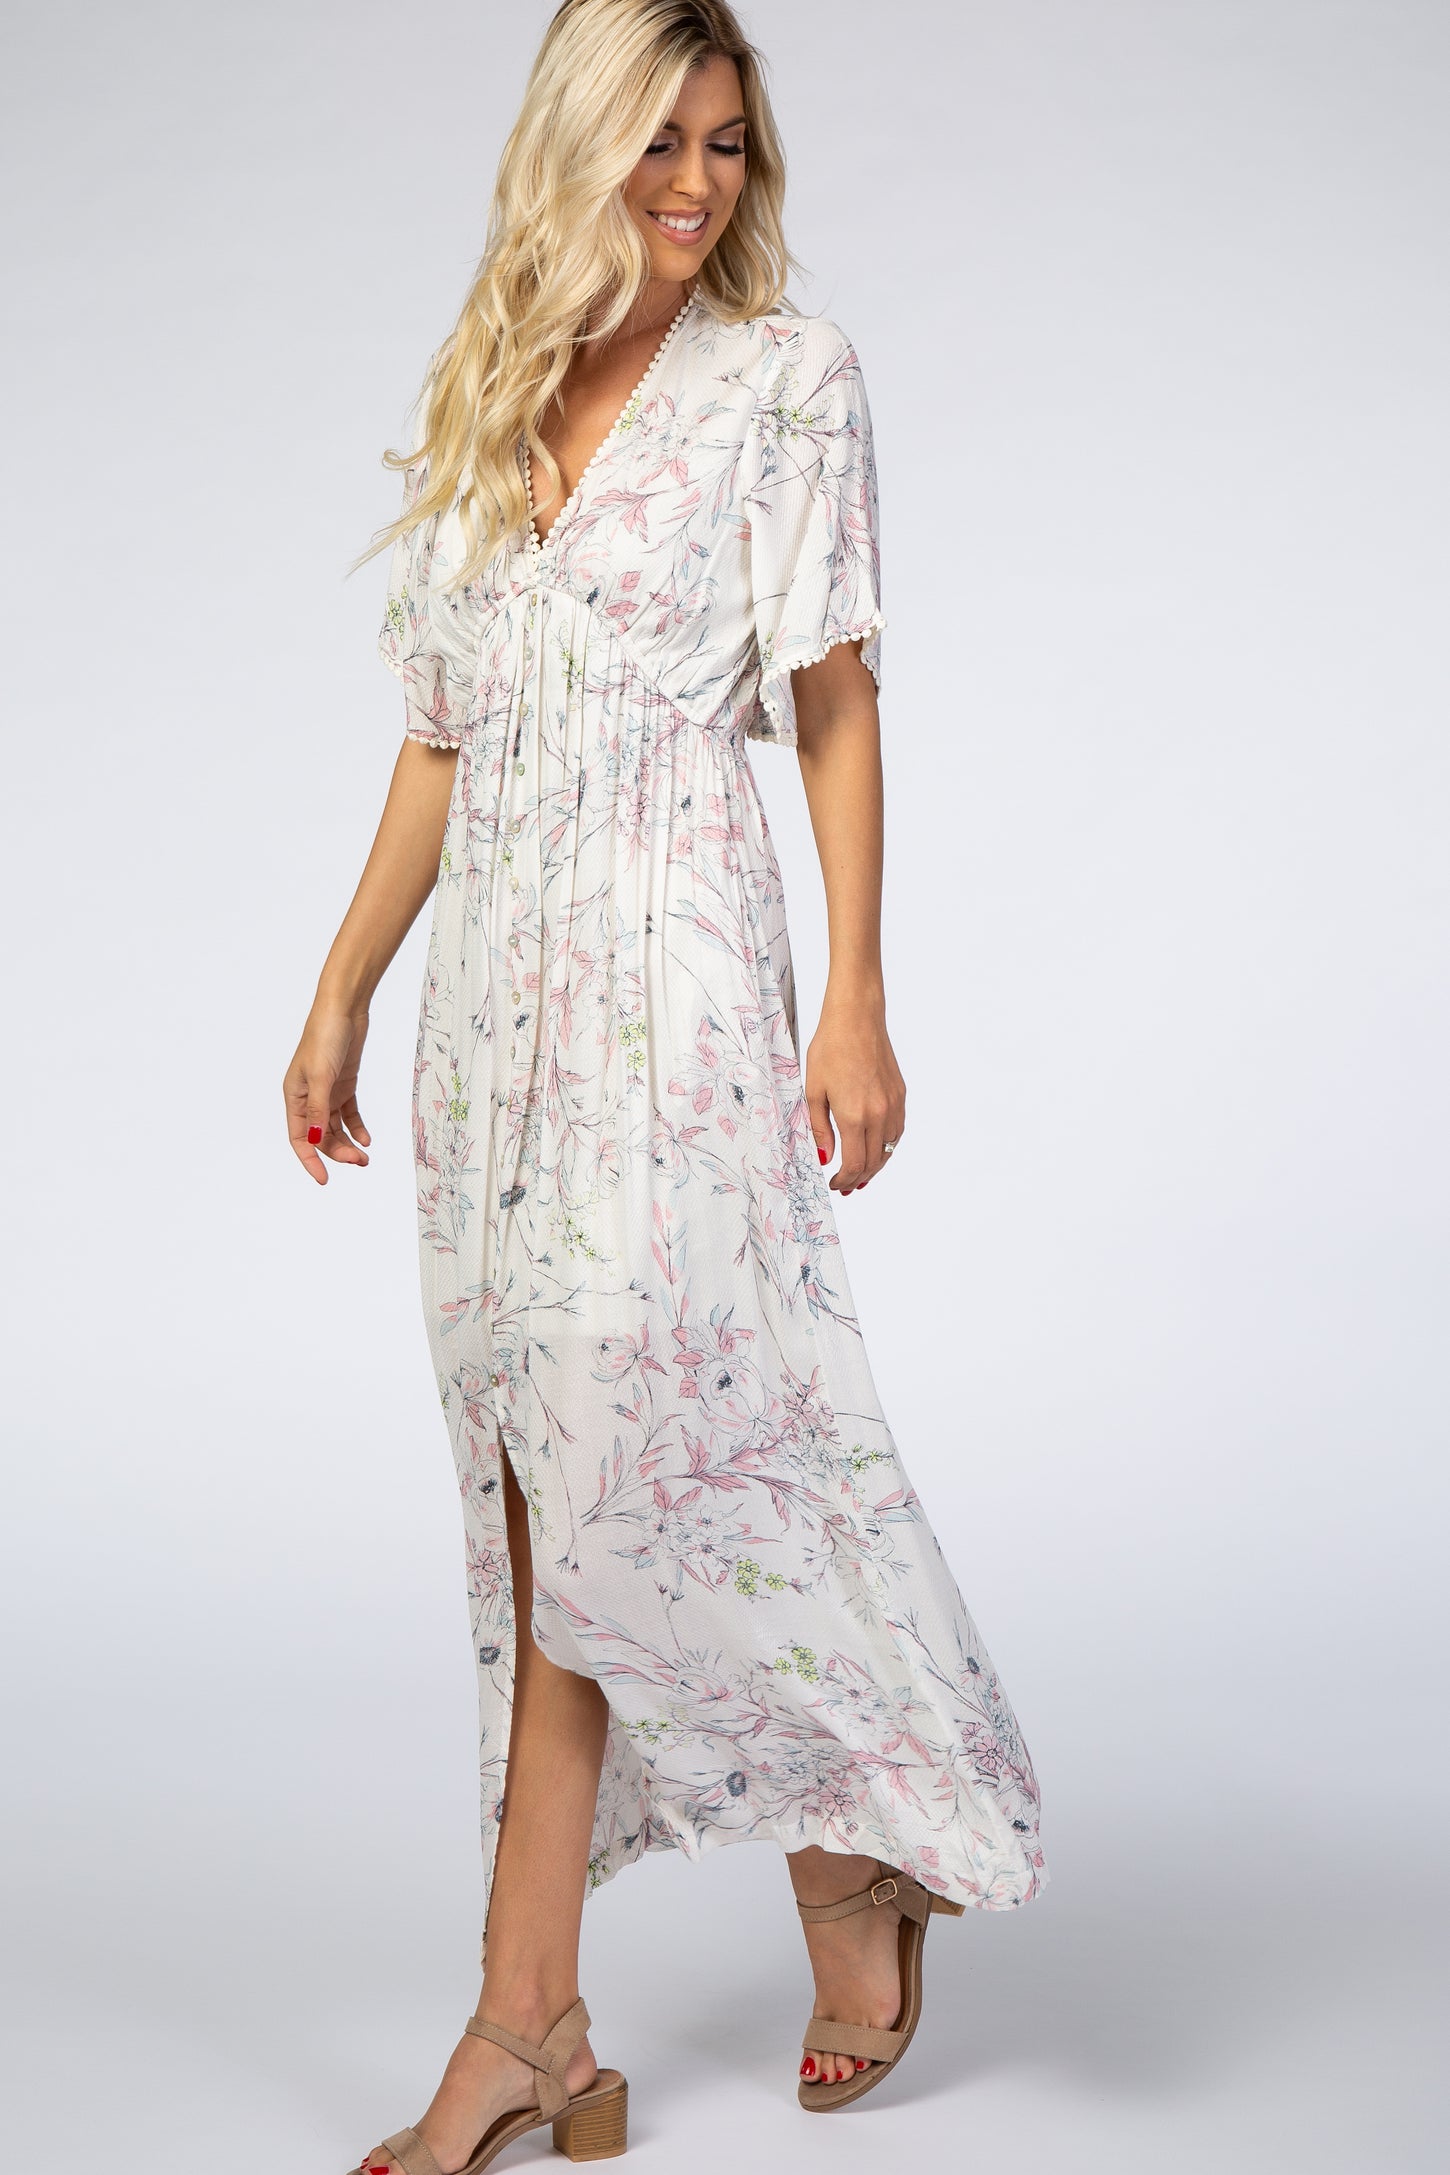 Ivory Floral Button Front Maxi Dress